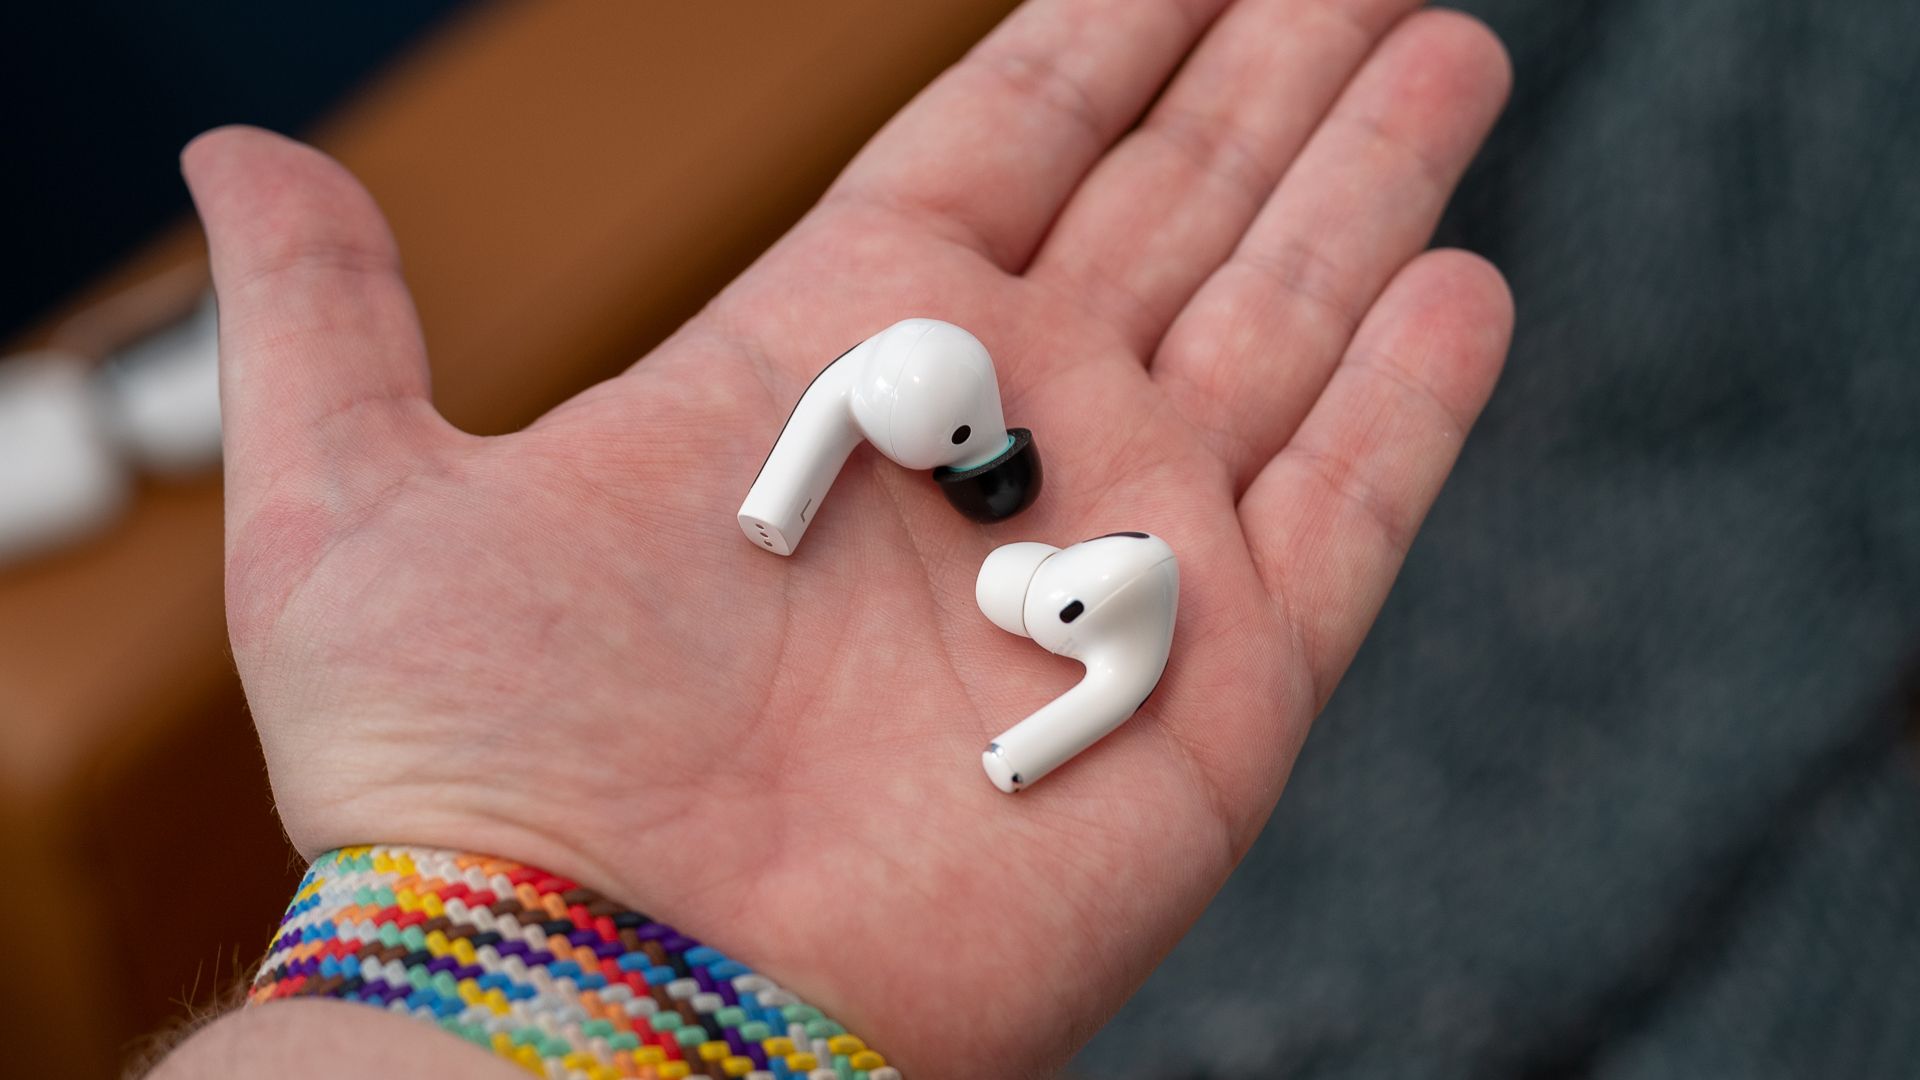 White earbuds in the palm of a hand